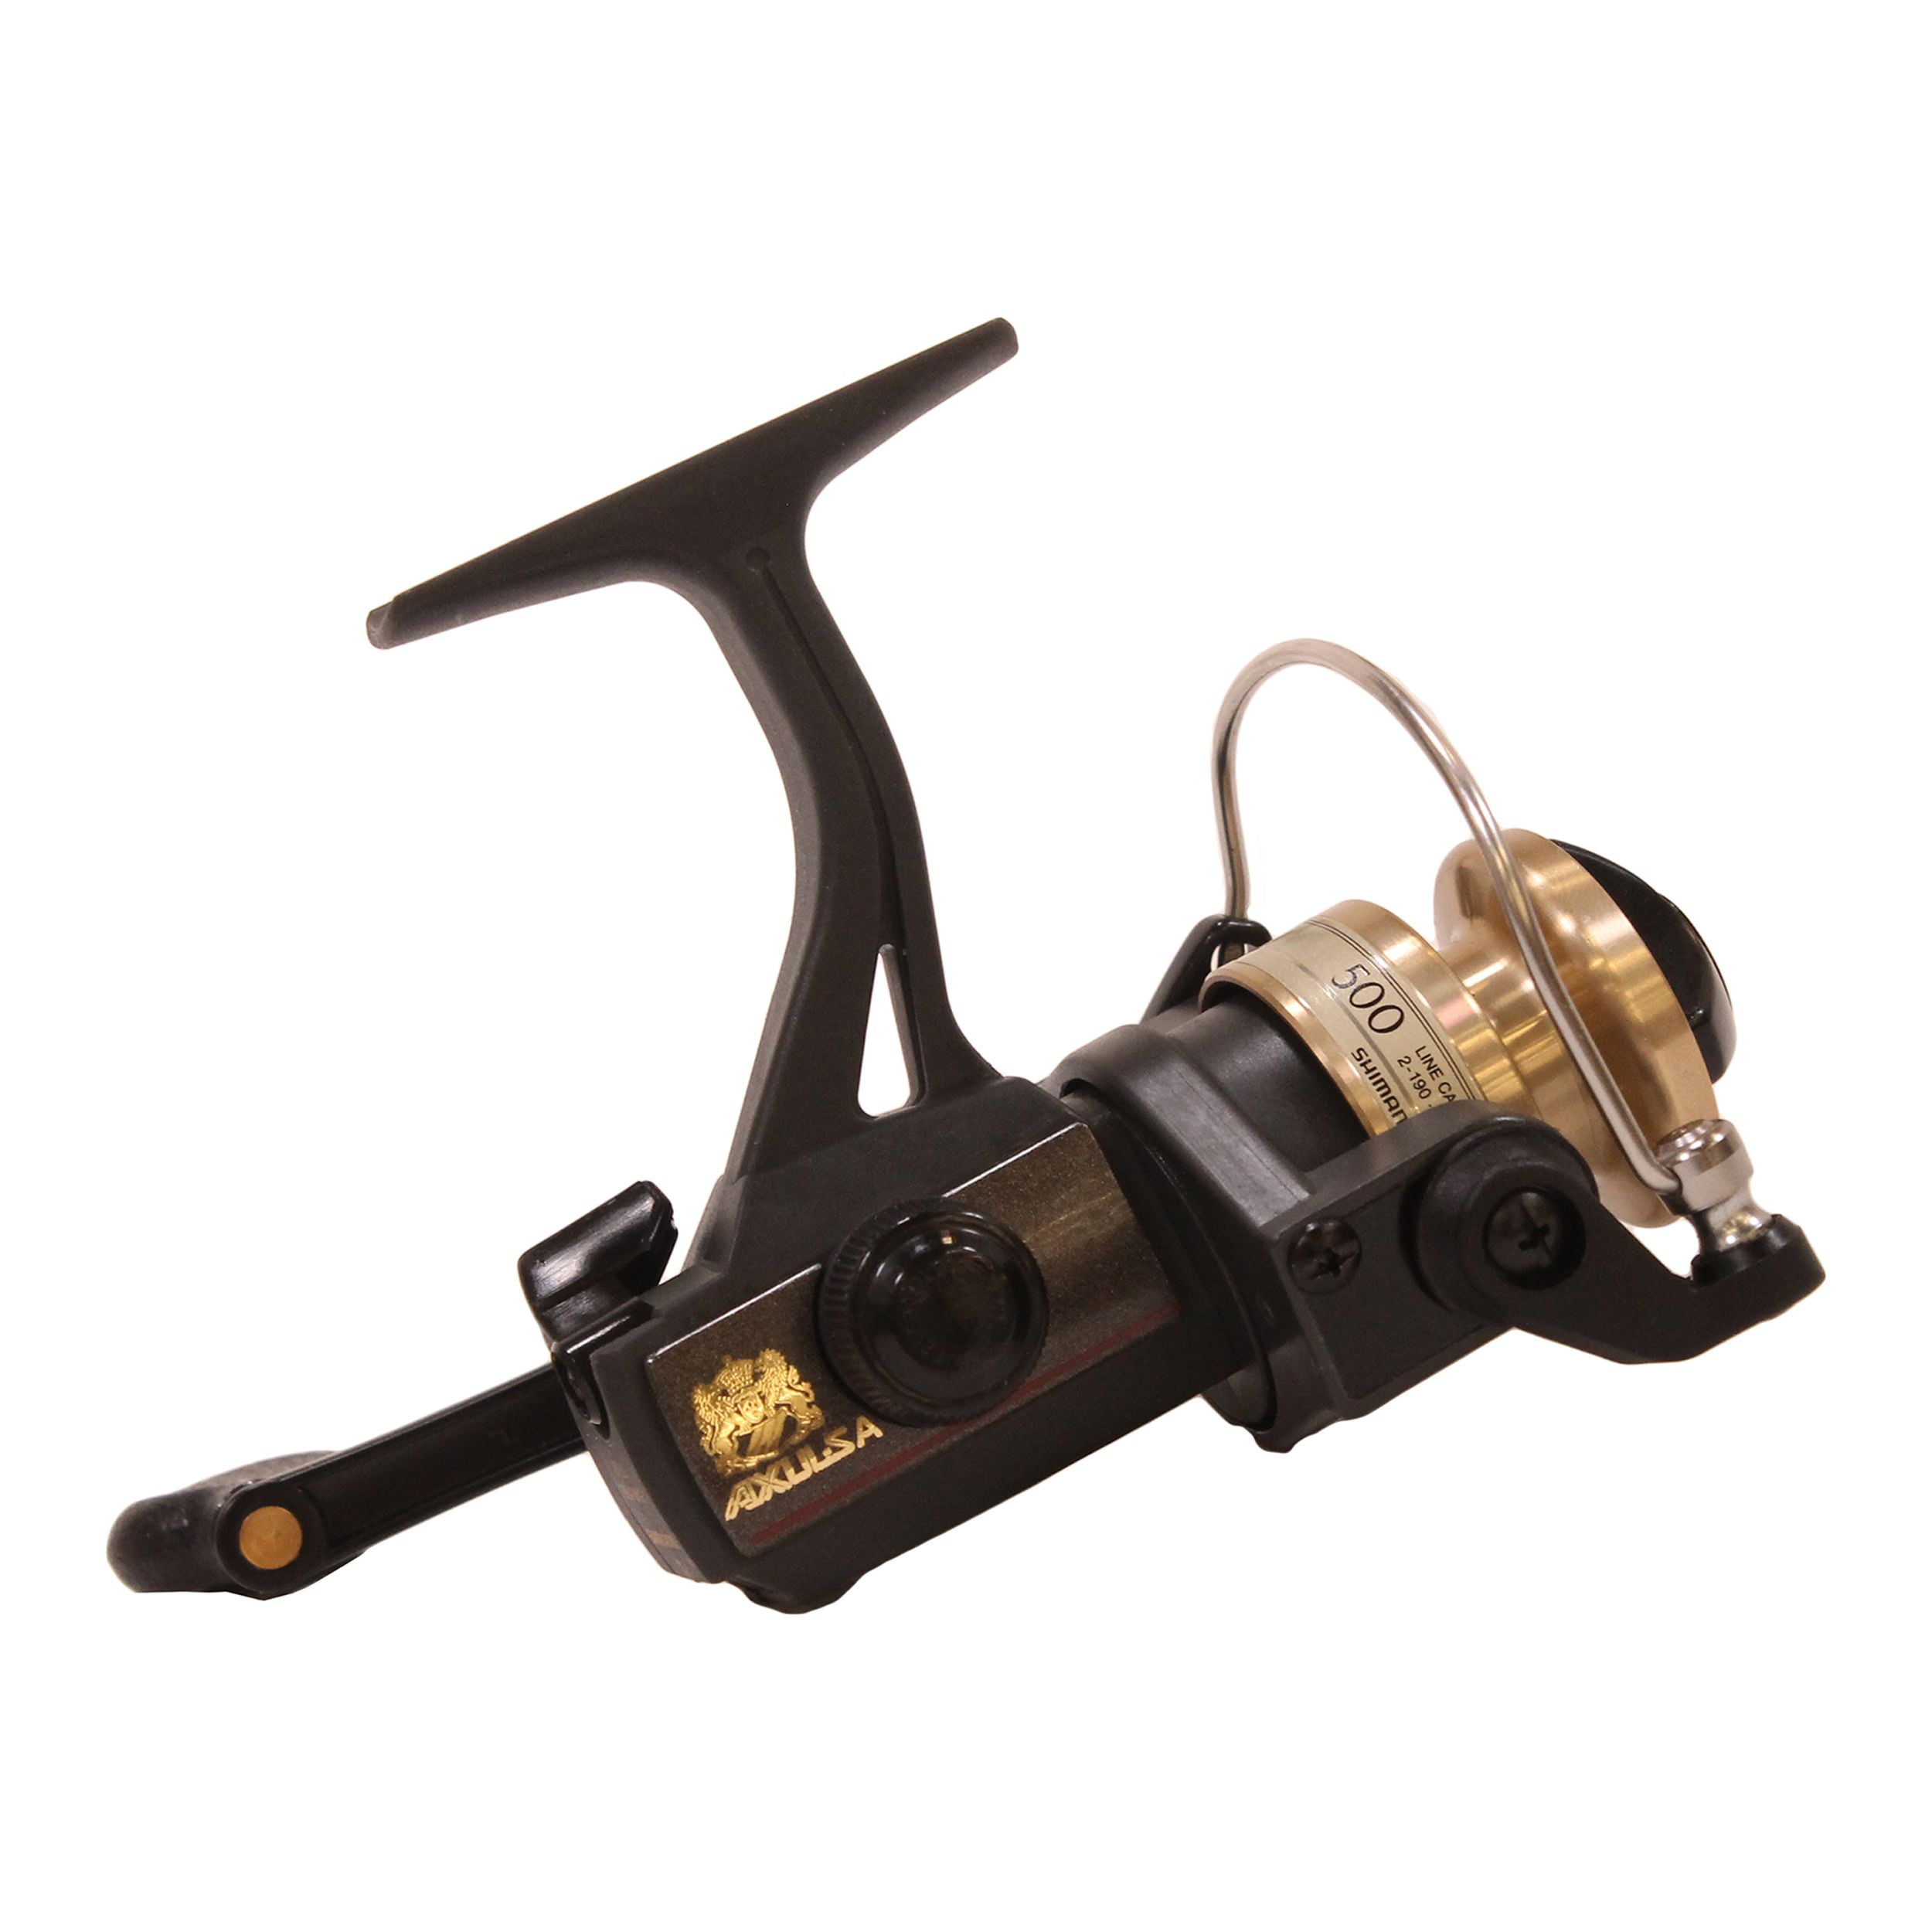 Shimano Axulsa Ultralight Spinning Reel 4.2:1 Gear Ratio, 18 Retreieve  Rate, 2 lb Max Drag, Ambidextrous, Clam Package 